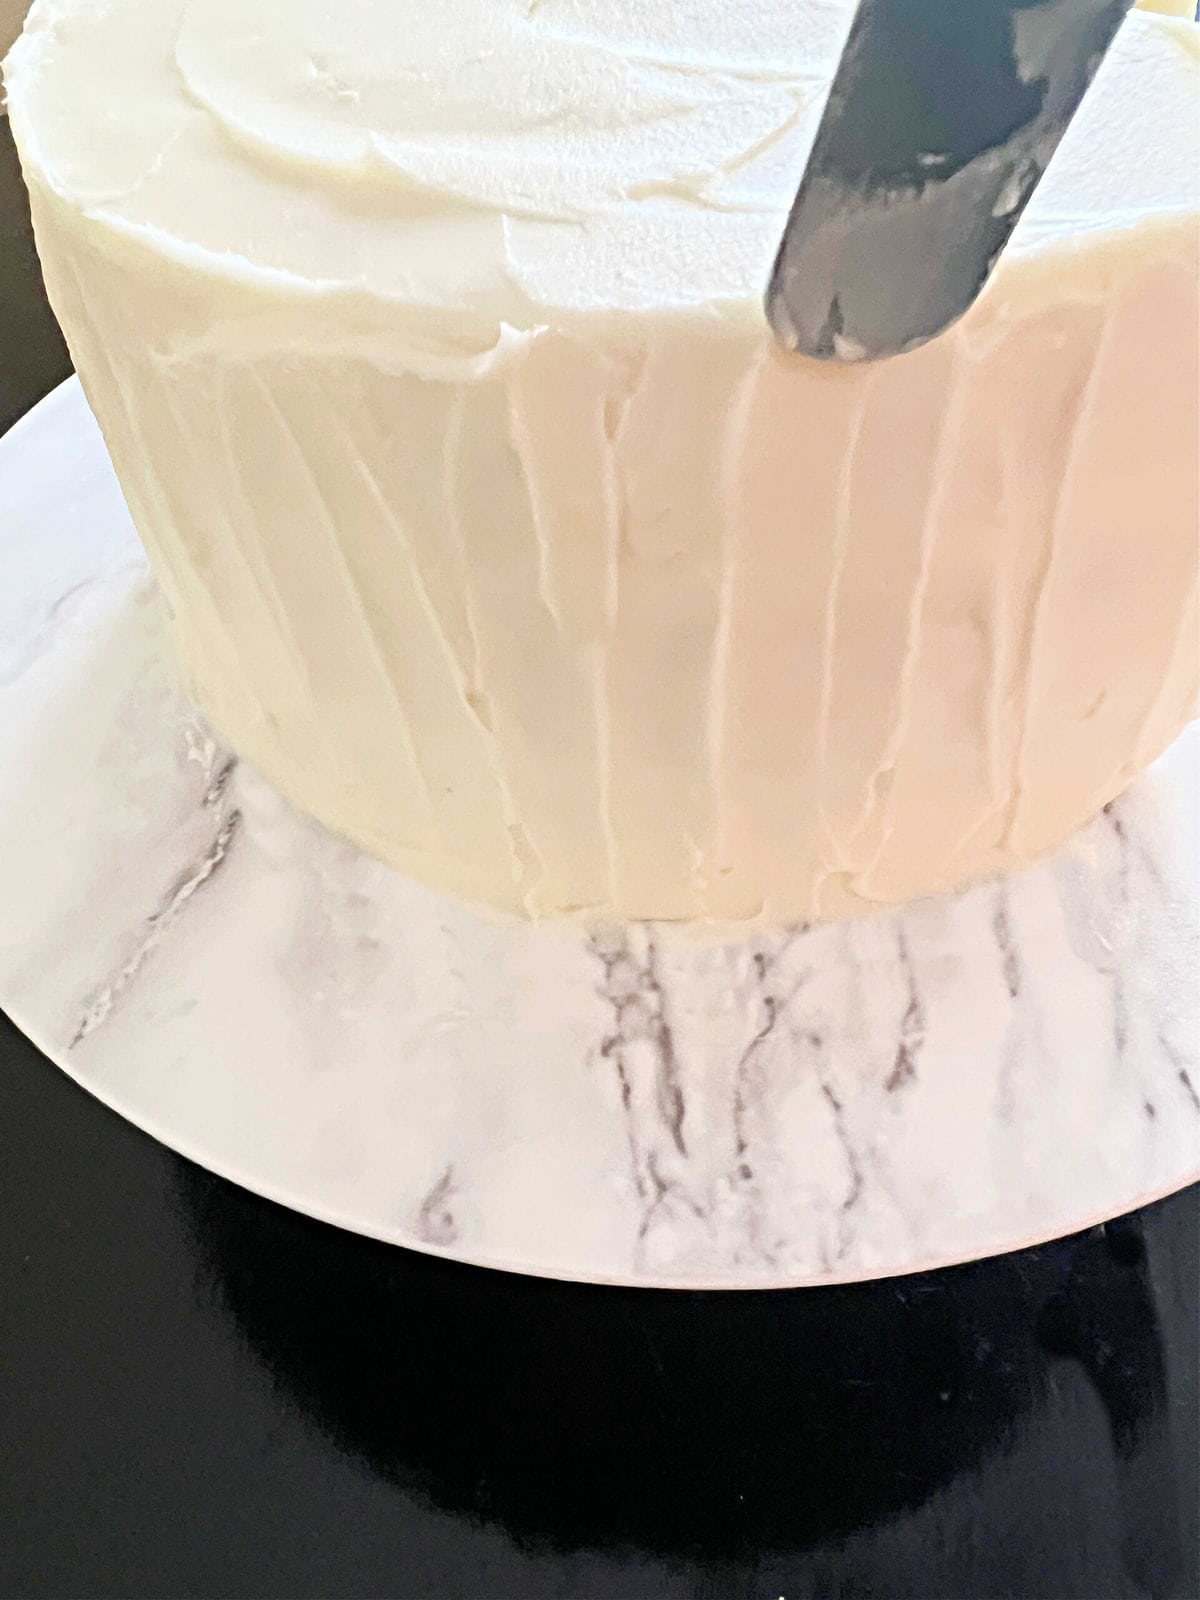 Adding texture to the frosted Lemon Almond Layer Cake using an offset spatula.